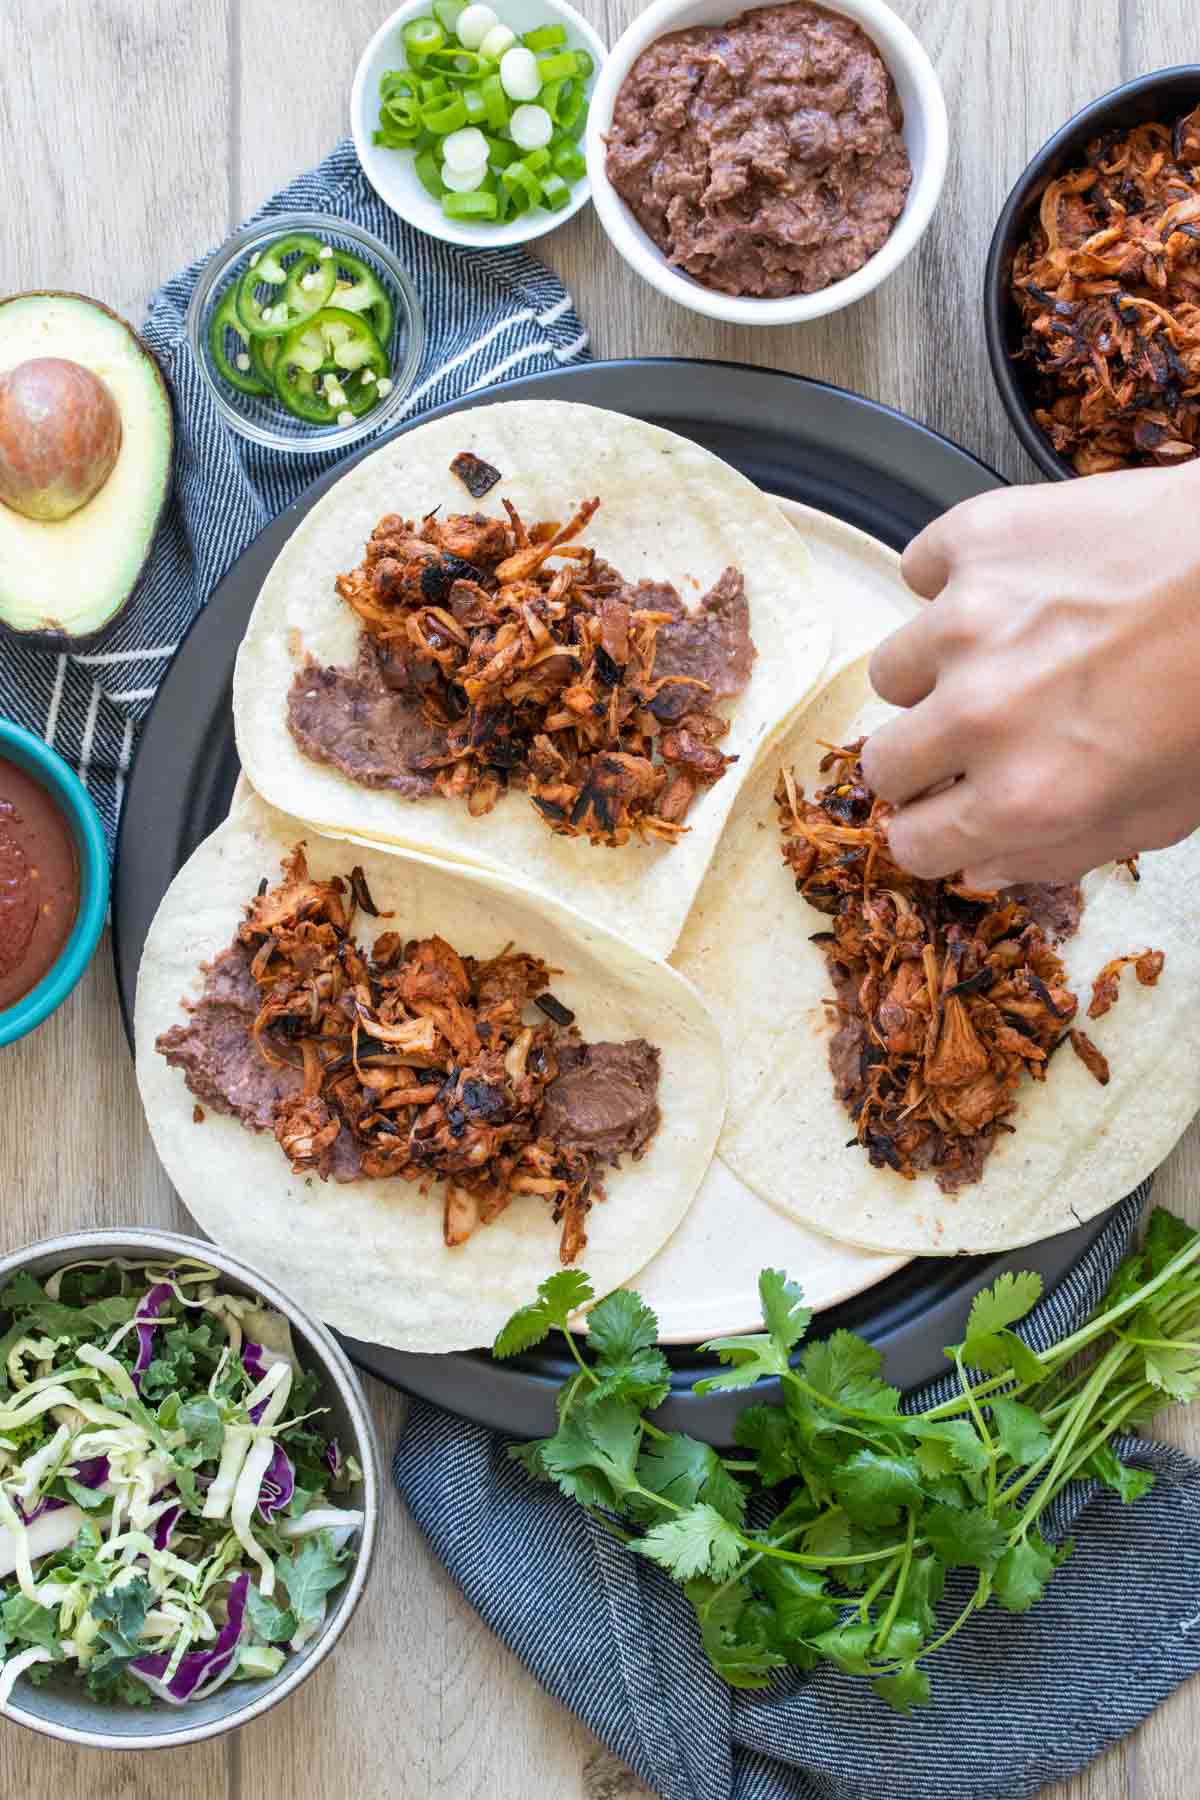 A hand putting jackfruit taco filling on tortillas with beans.